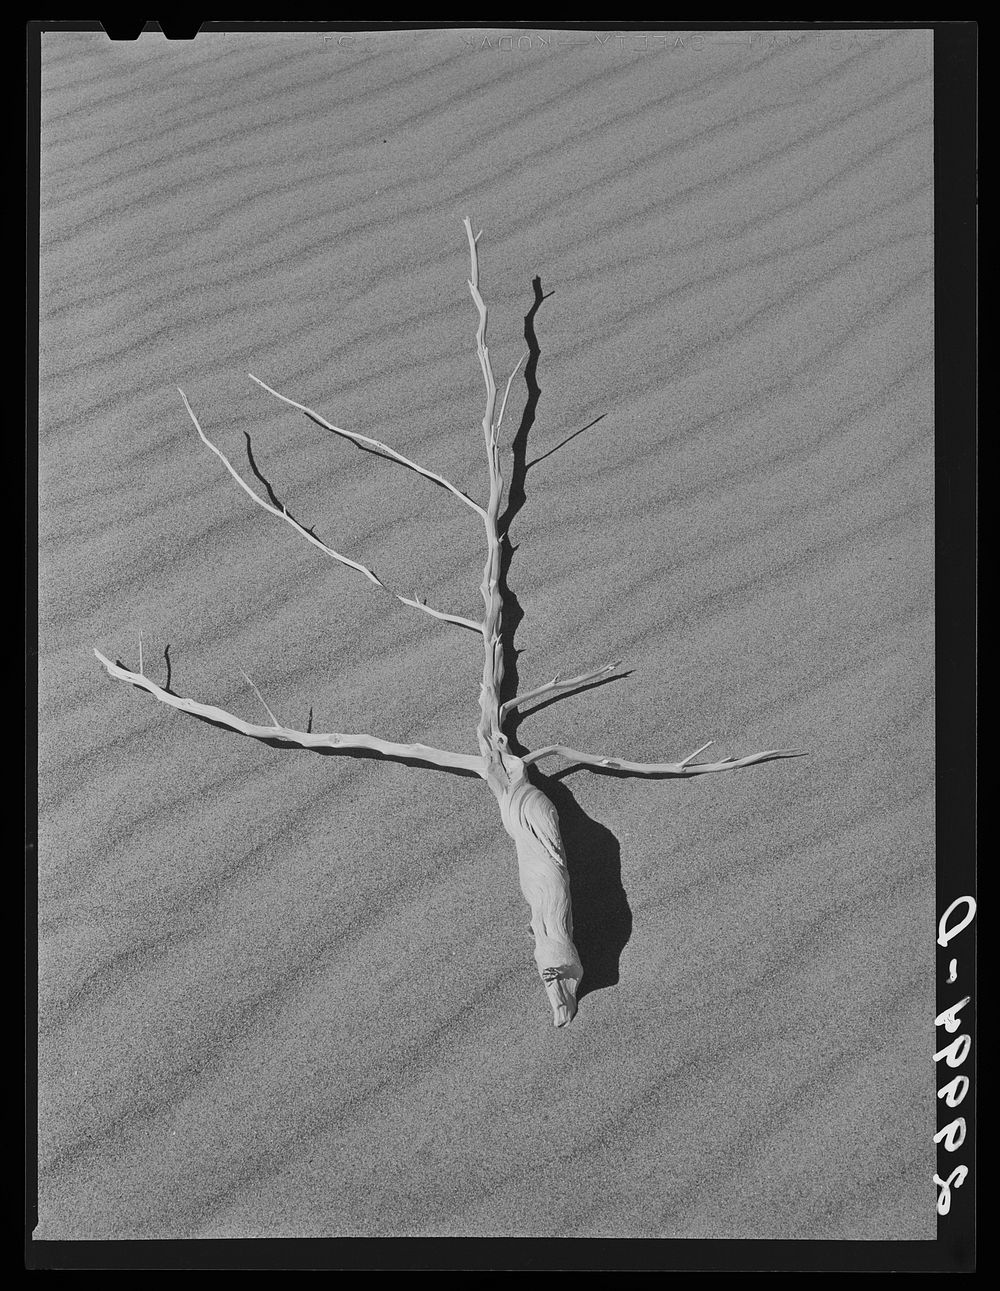 Sagebrush on sand dune. Nye County, Nevada. Sourced from the Library of Congress.